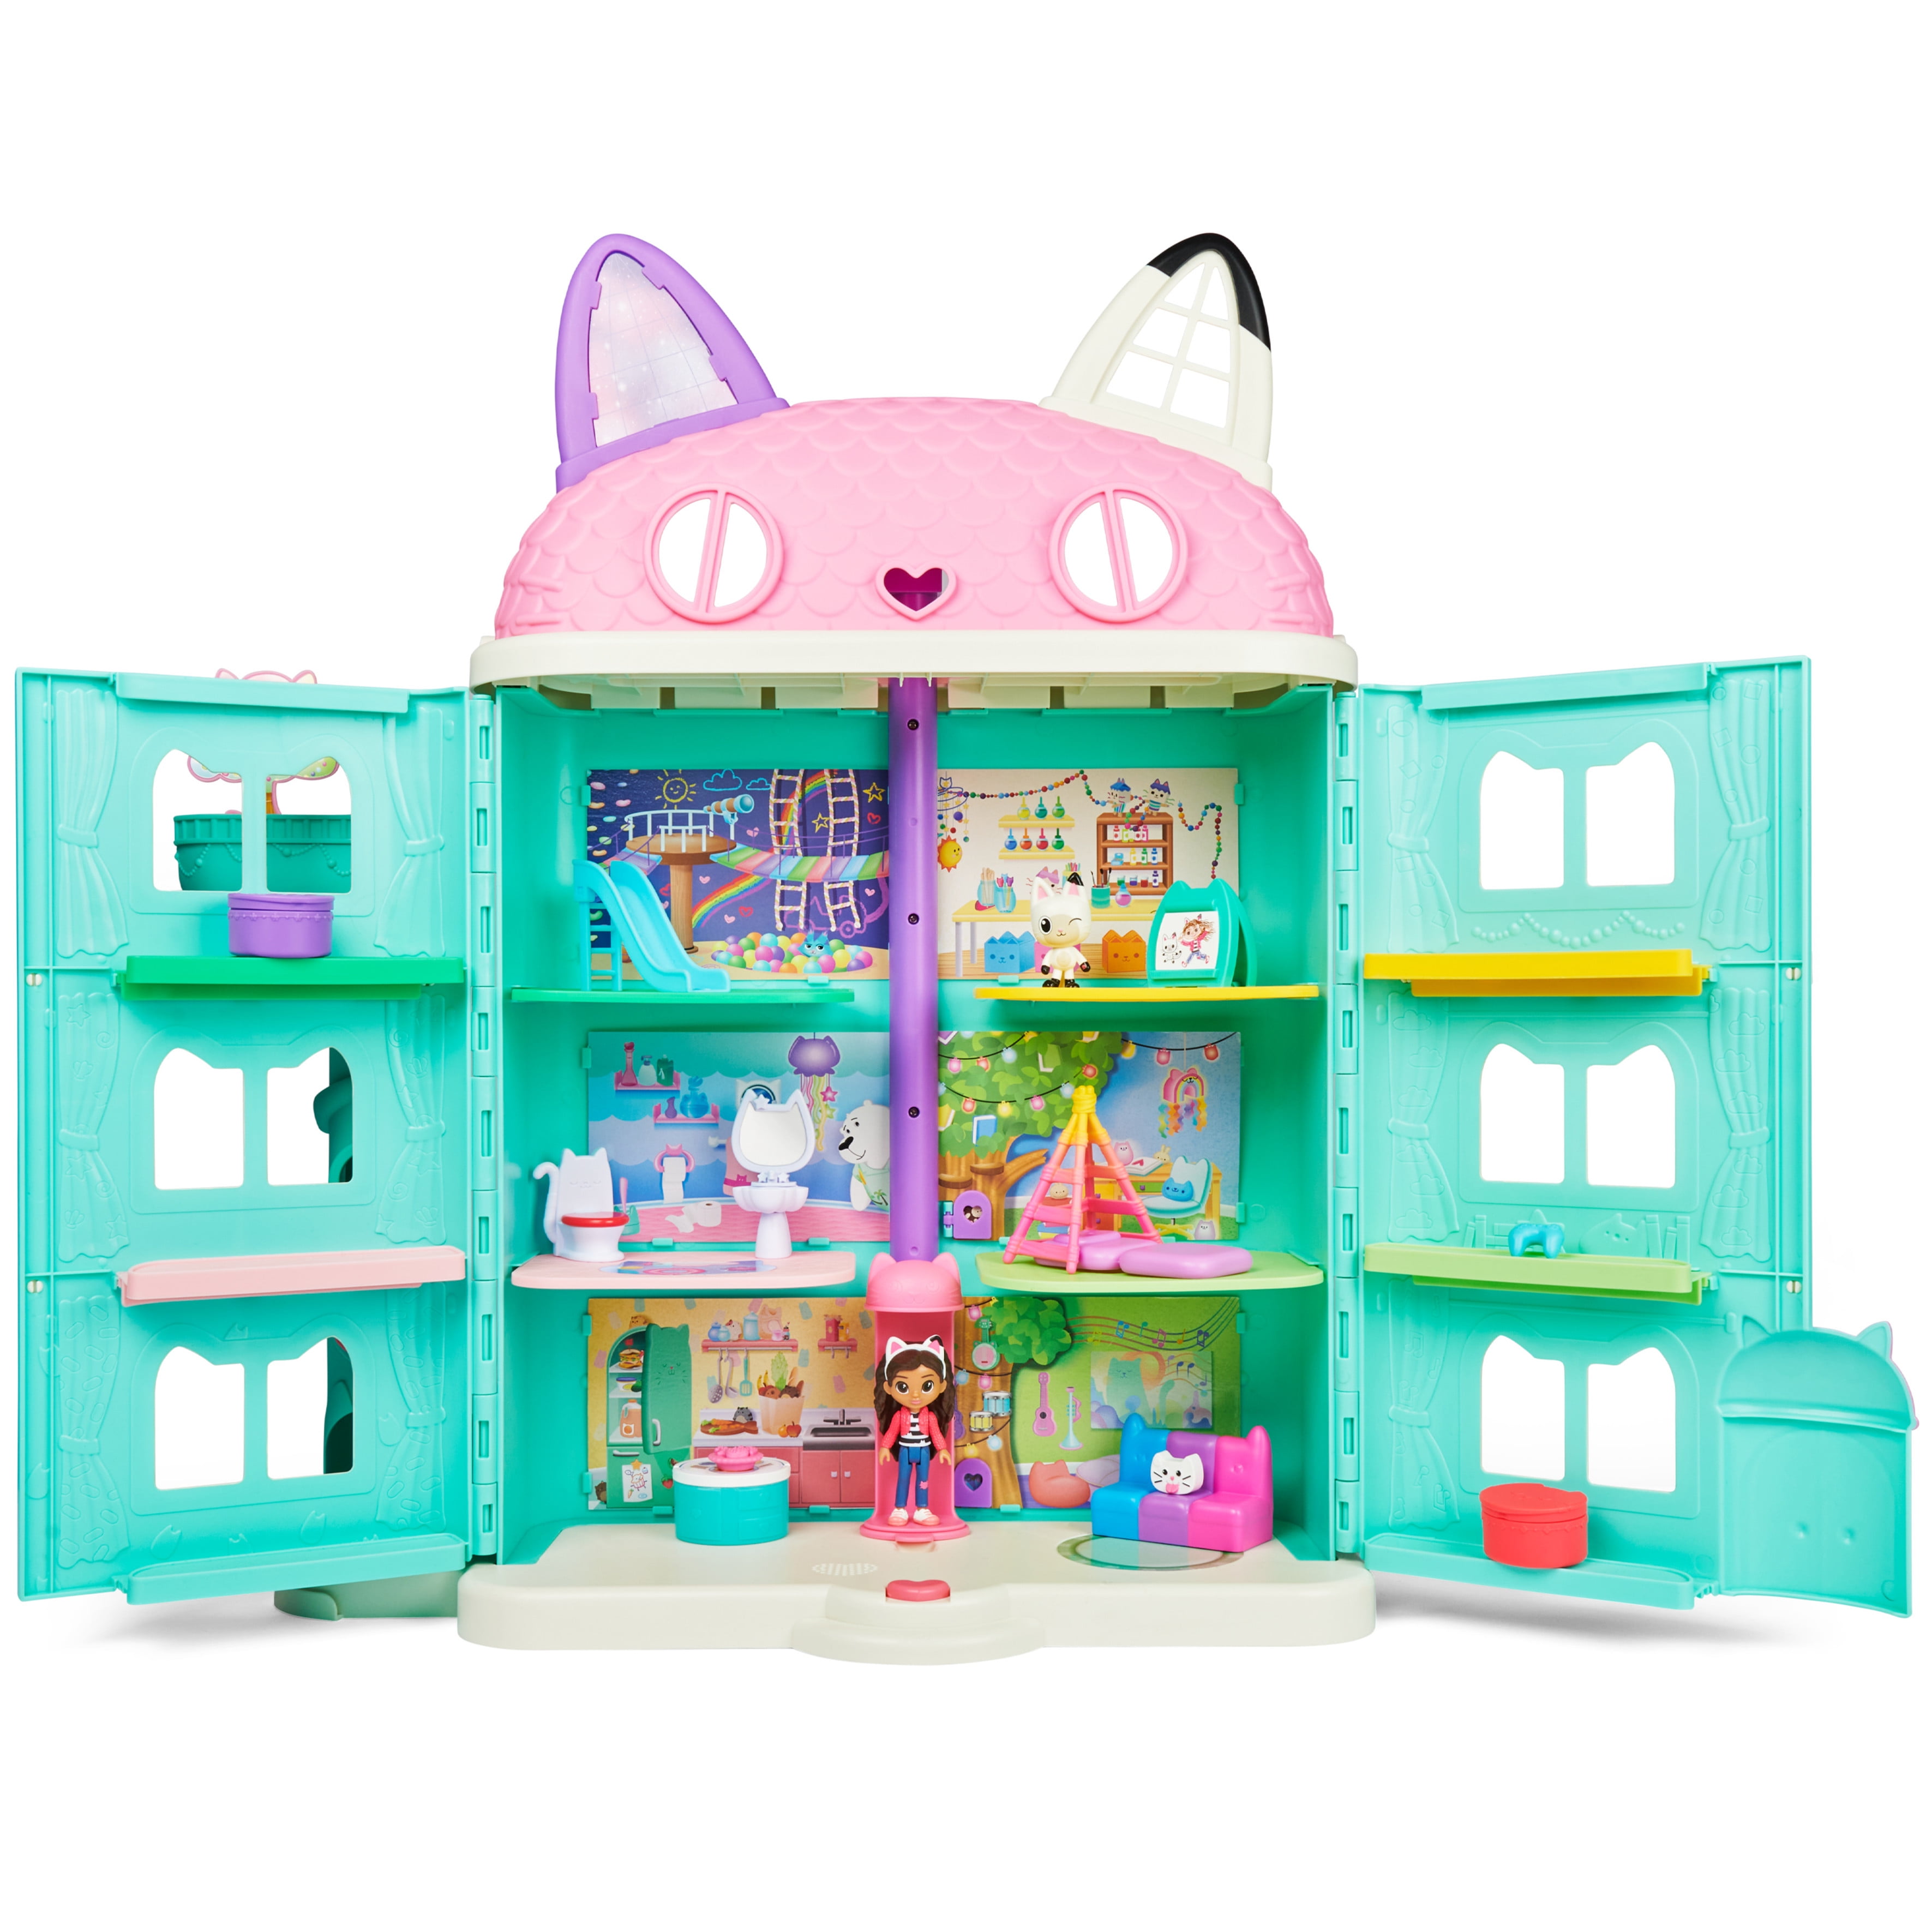 Gabby’s Dollhouse, (over 2ft) Purrfect Dollhouse, Assembly Required